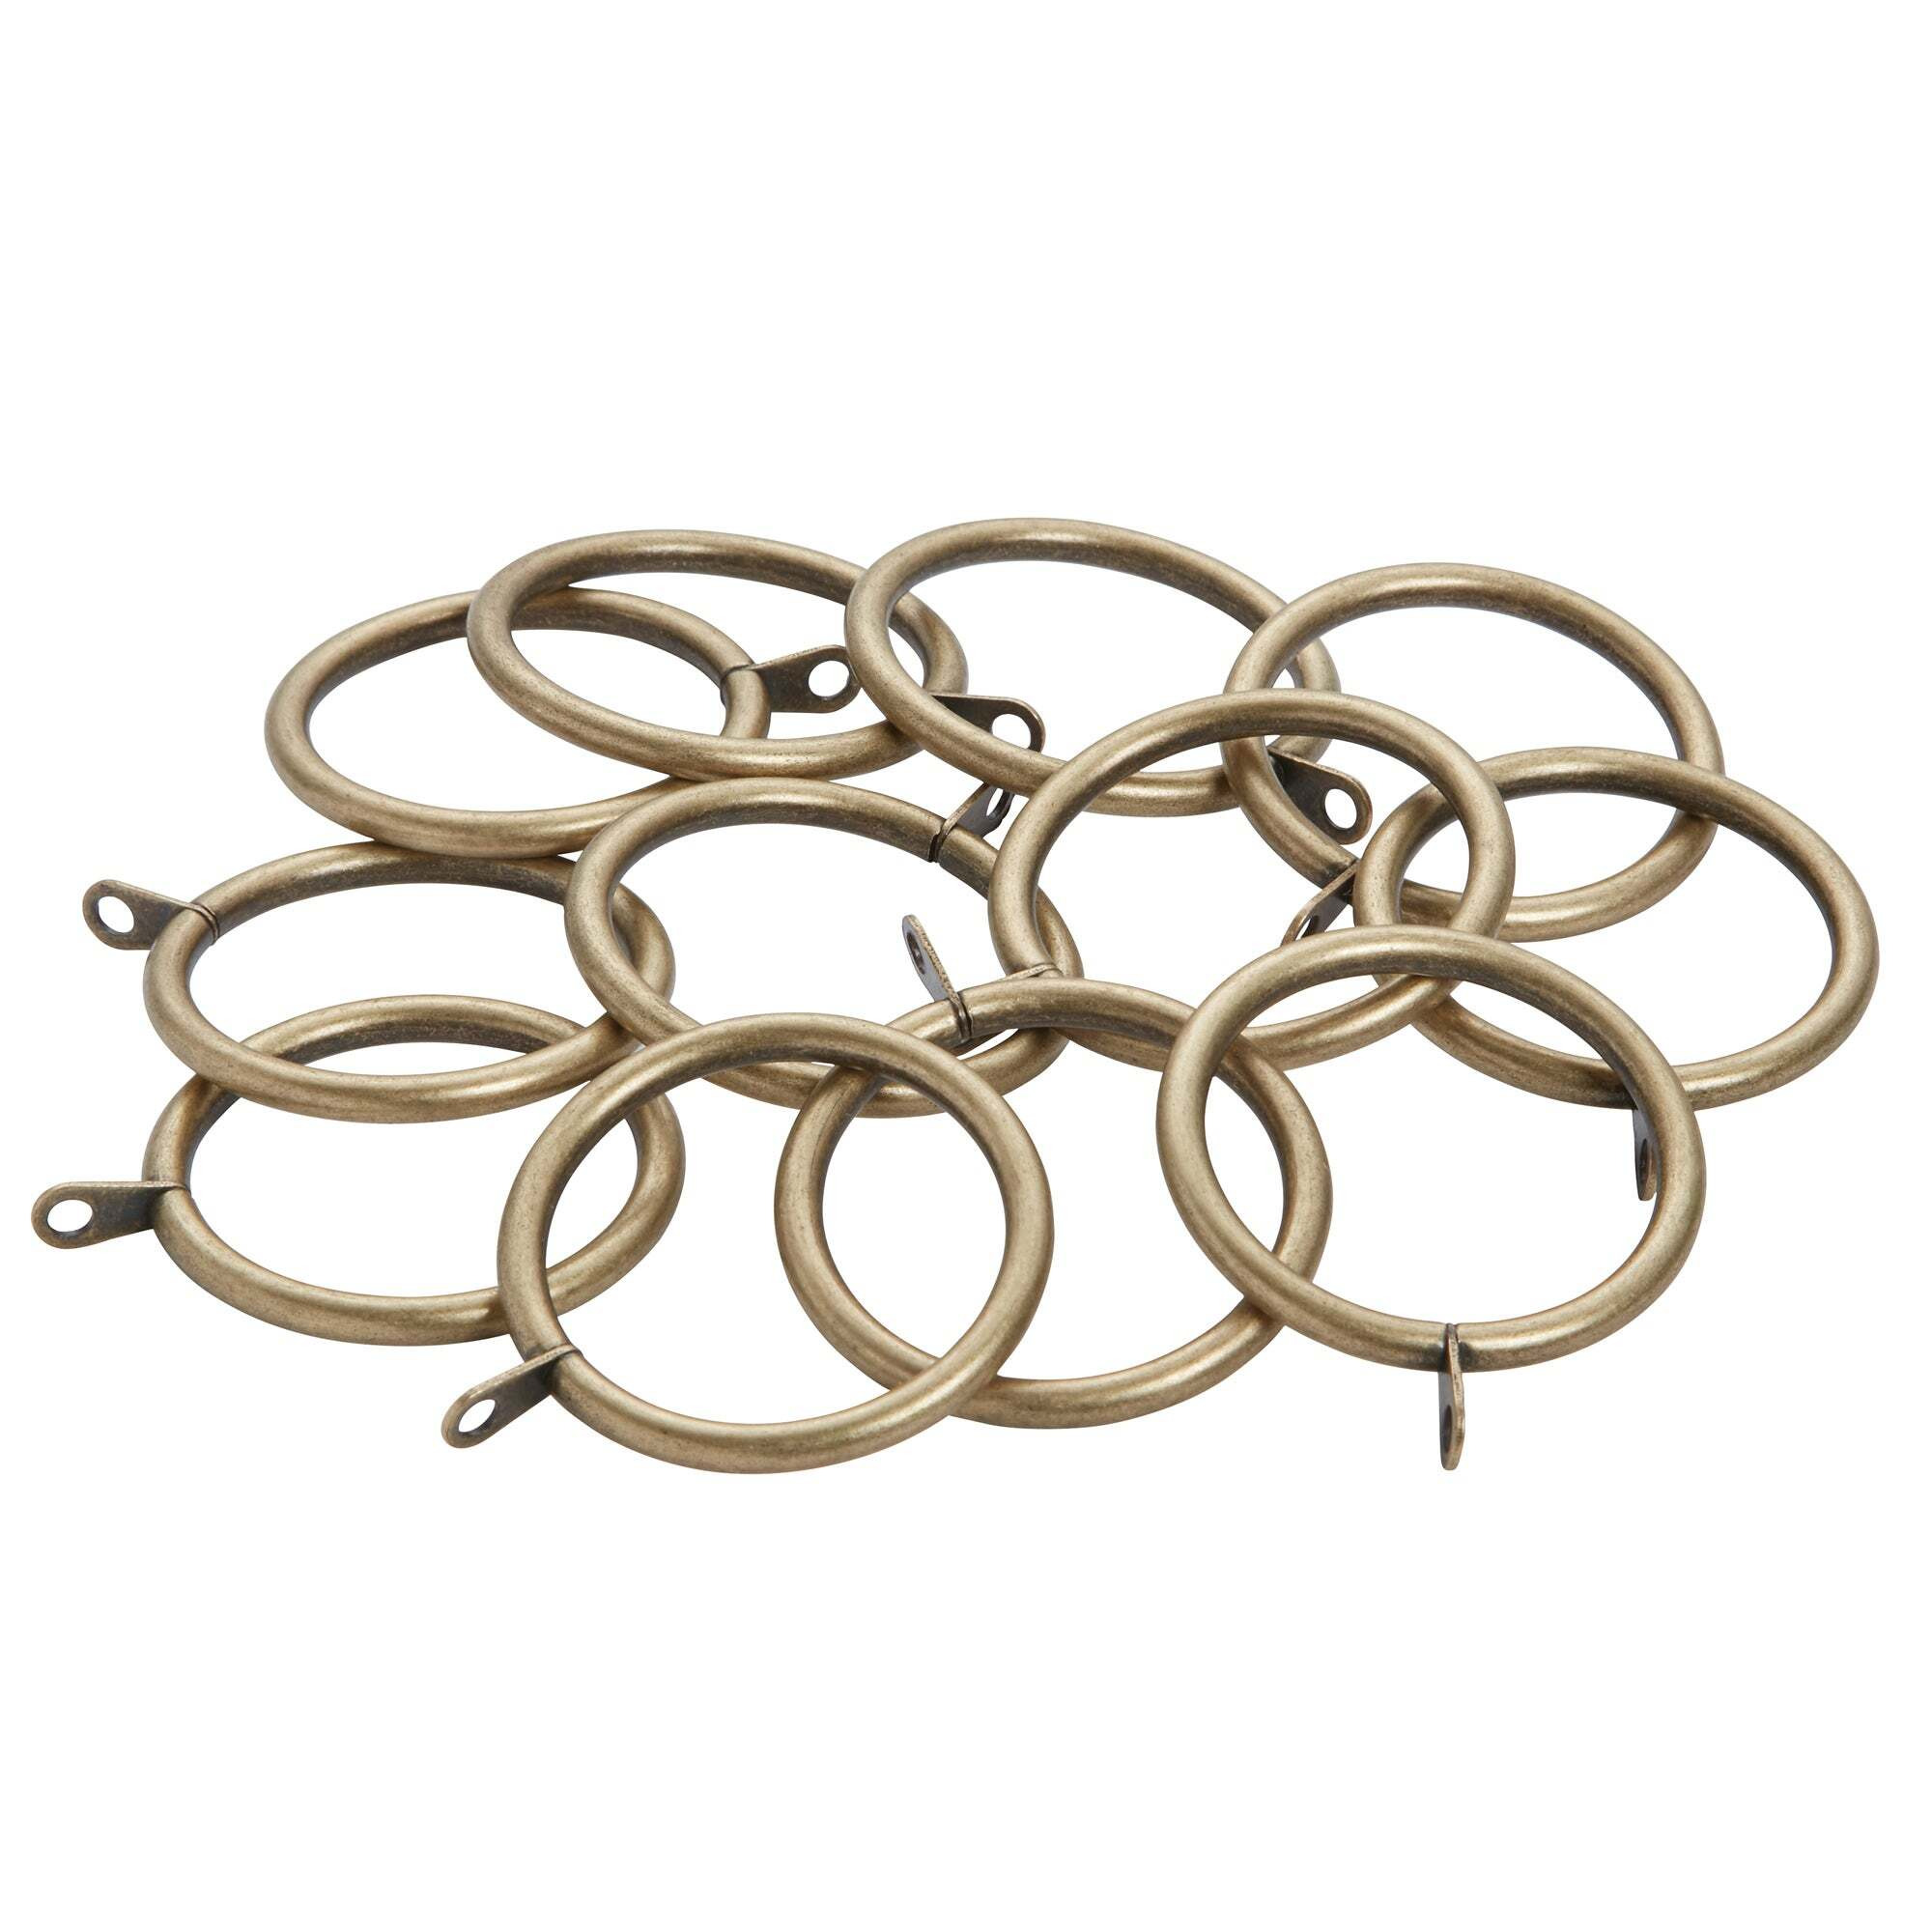 Mix and Match Pack of 12 Unlined Curtain Rings Dia. 28mm Brown